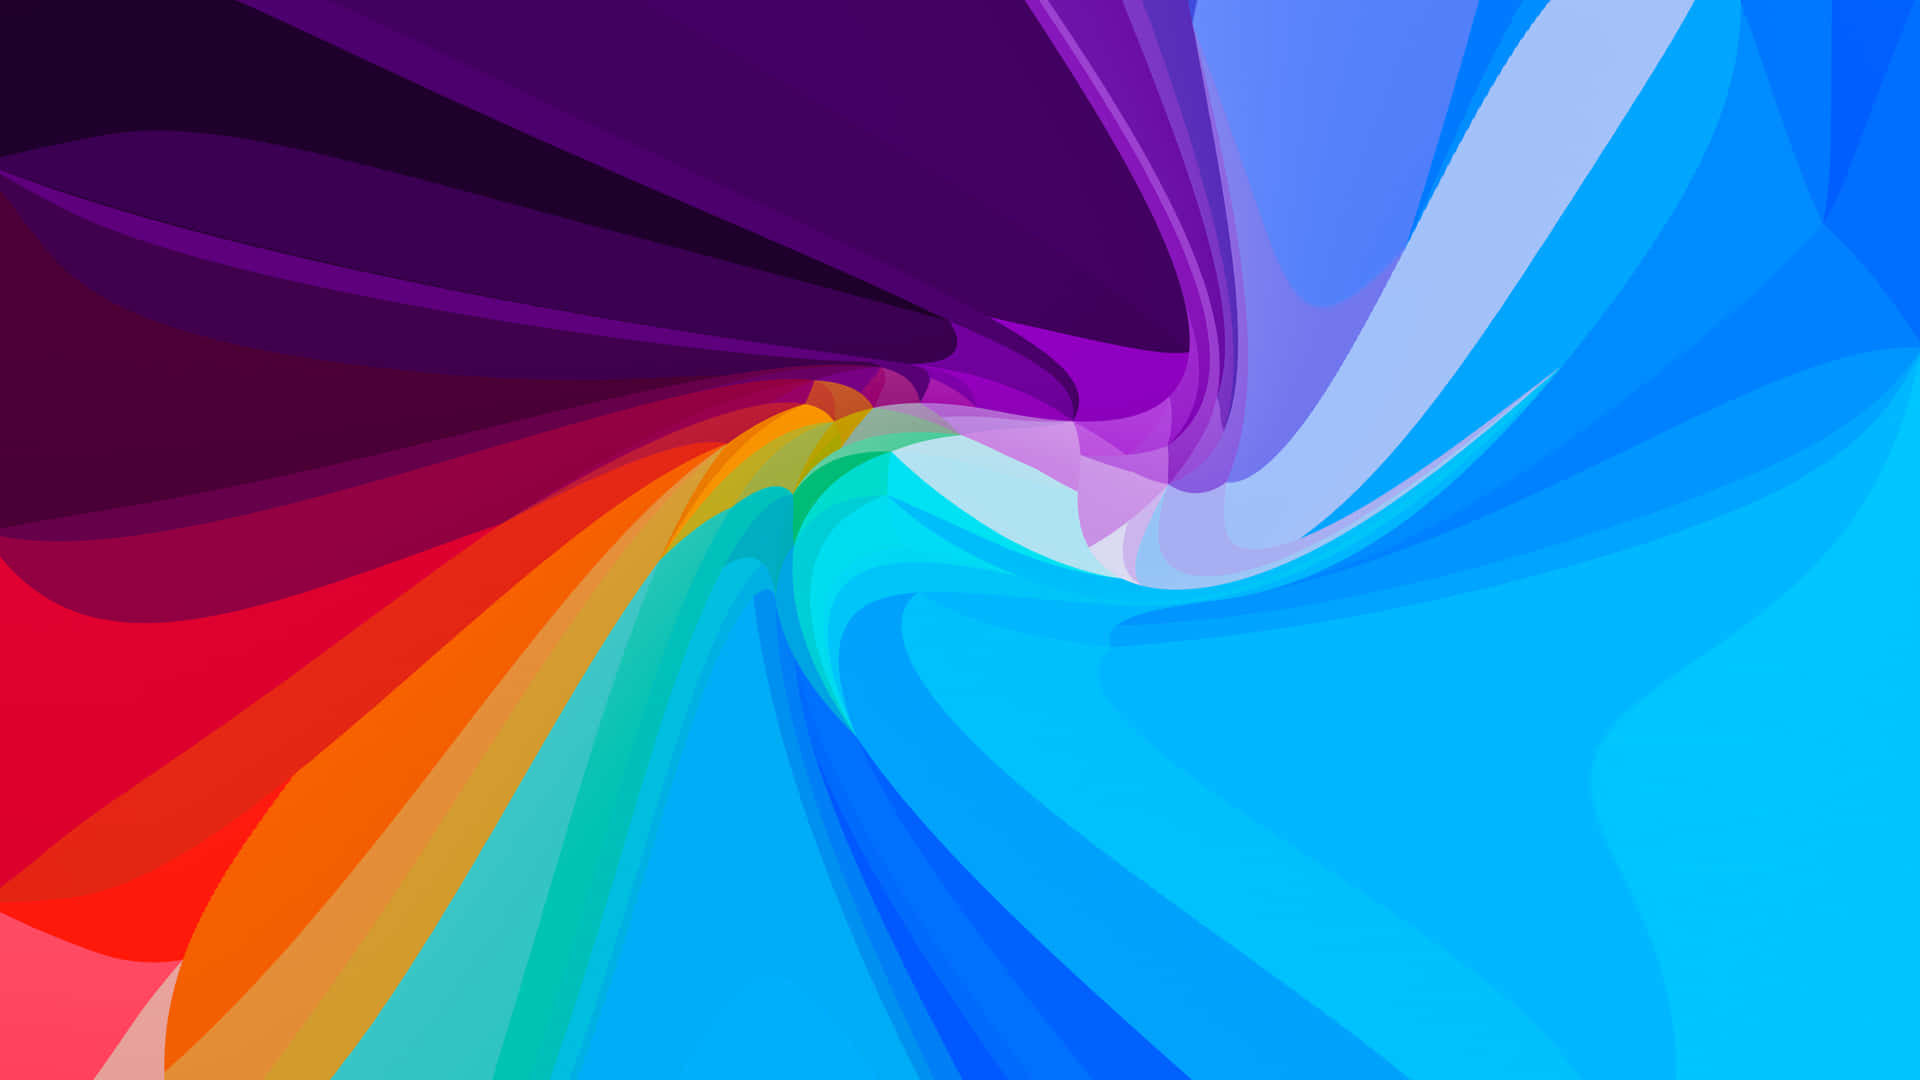 Enjoy The Vibrancy Of Colorful Abstract Art Wallpaper